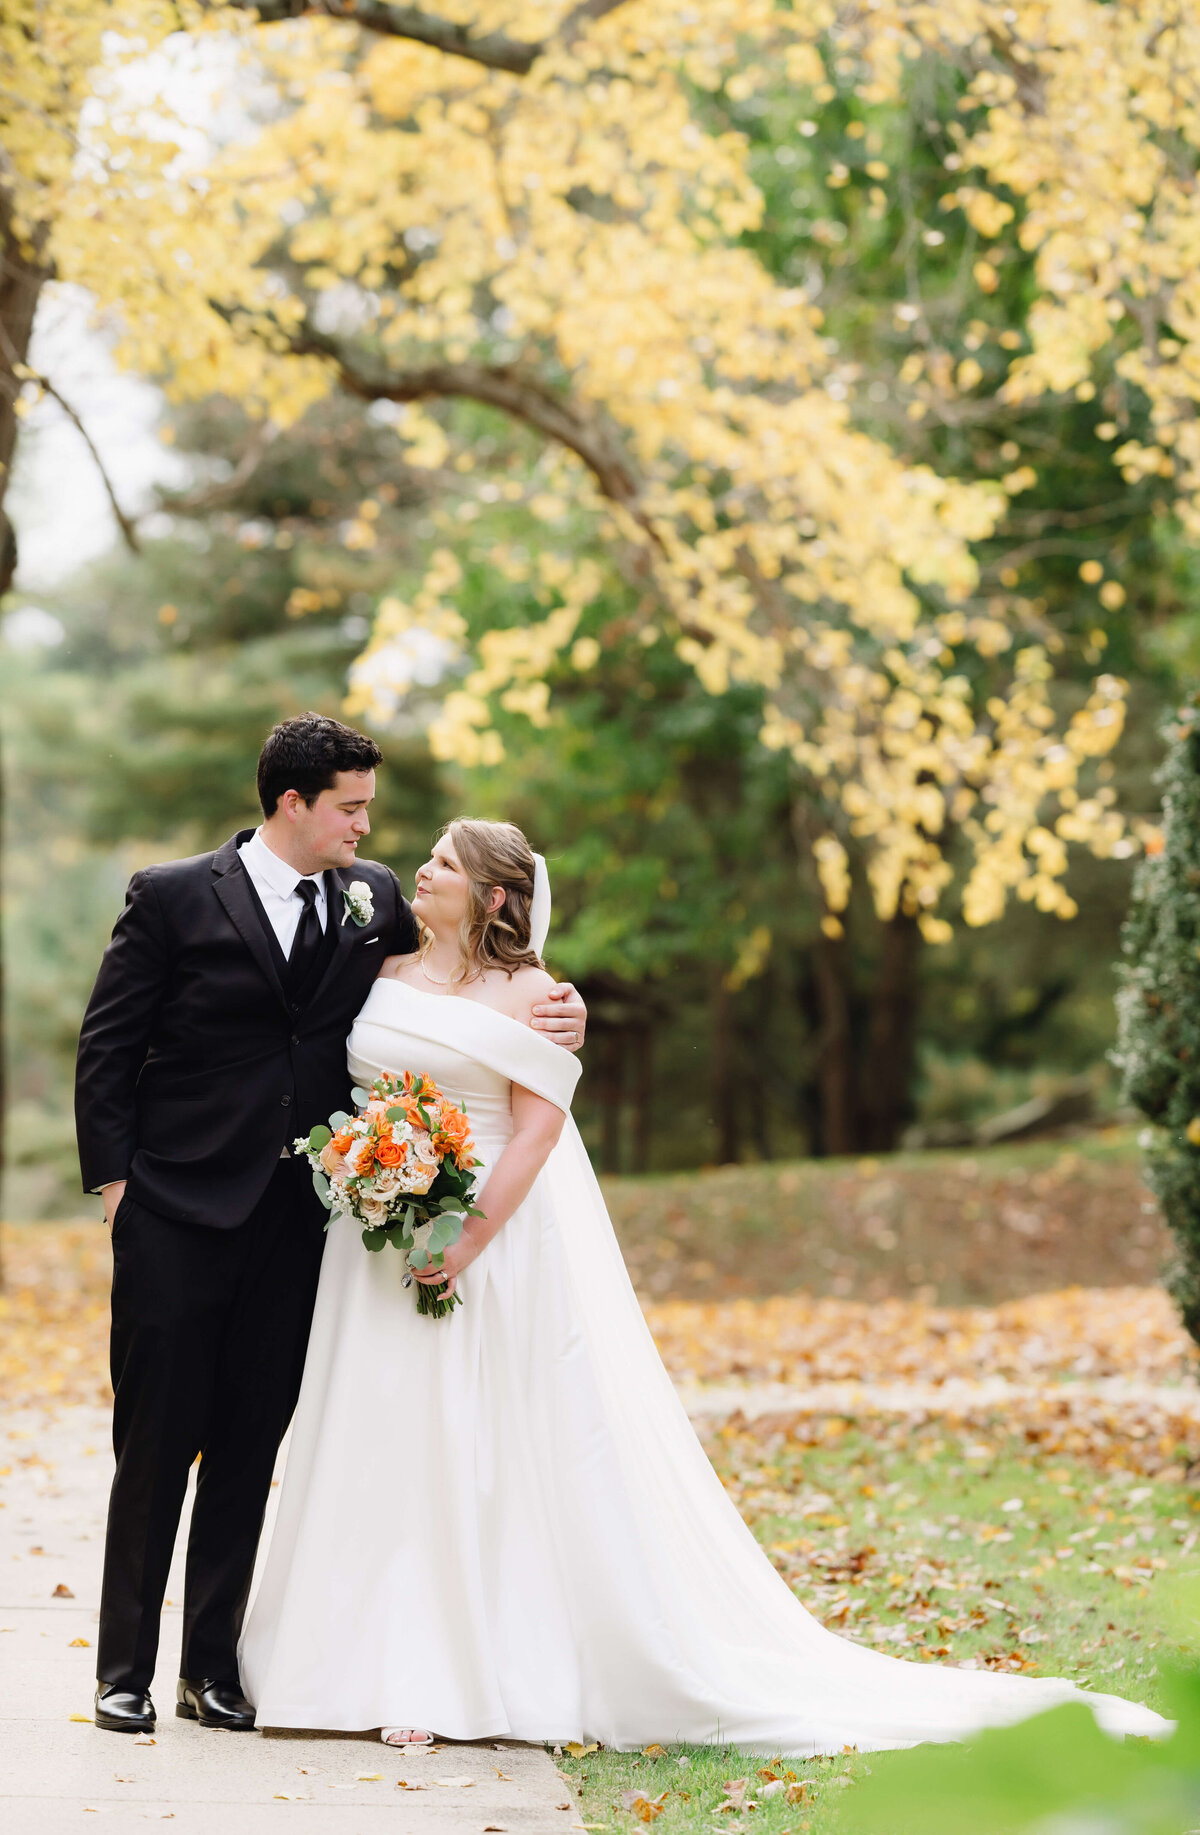 Virginia wedding photographer captures bride and groom on a path together with groom wrapping his arm around his bride and she looks up to him in love at richmond wedding venues